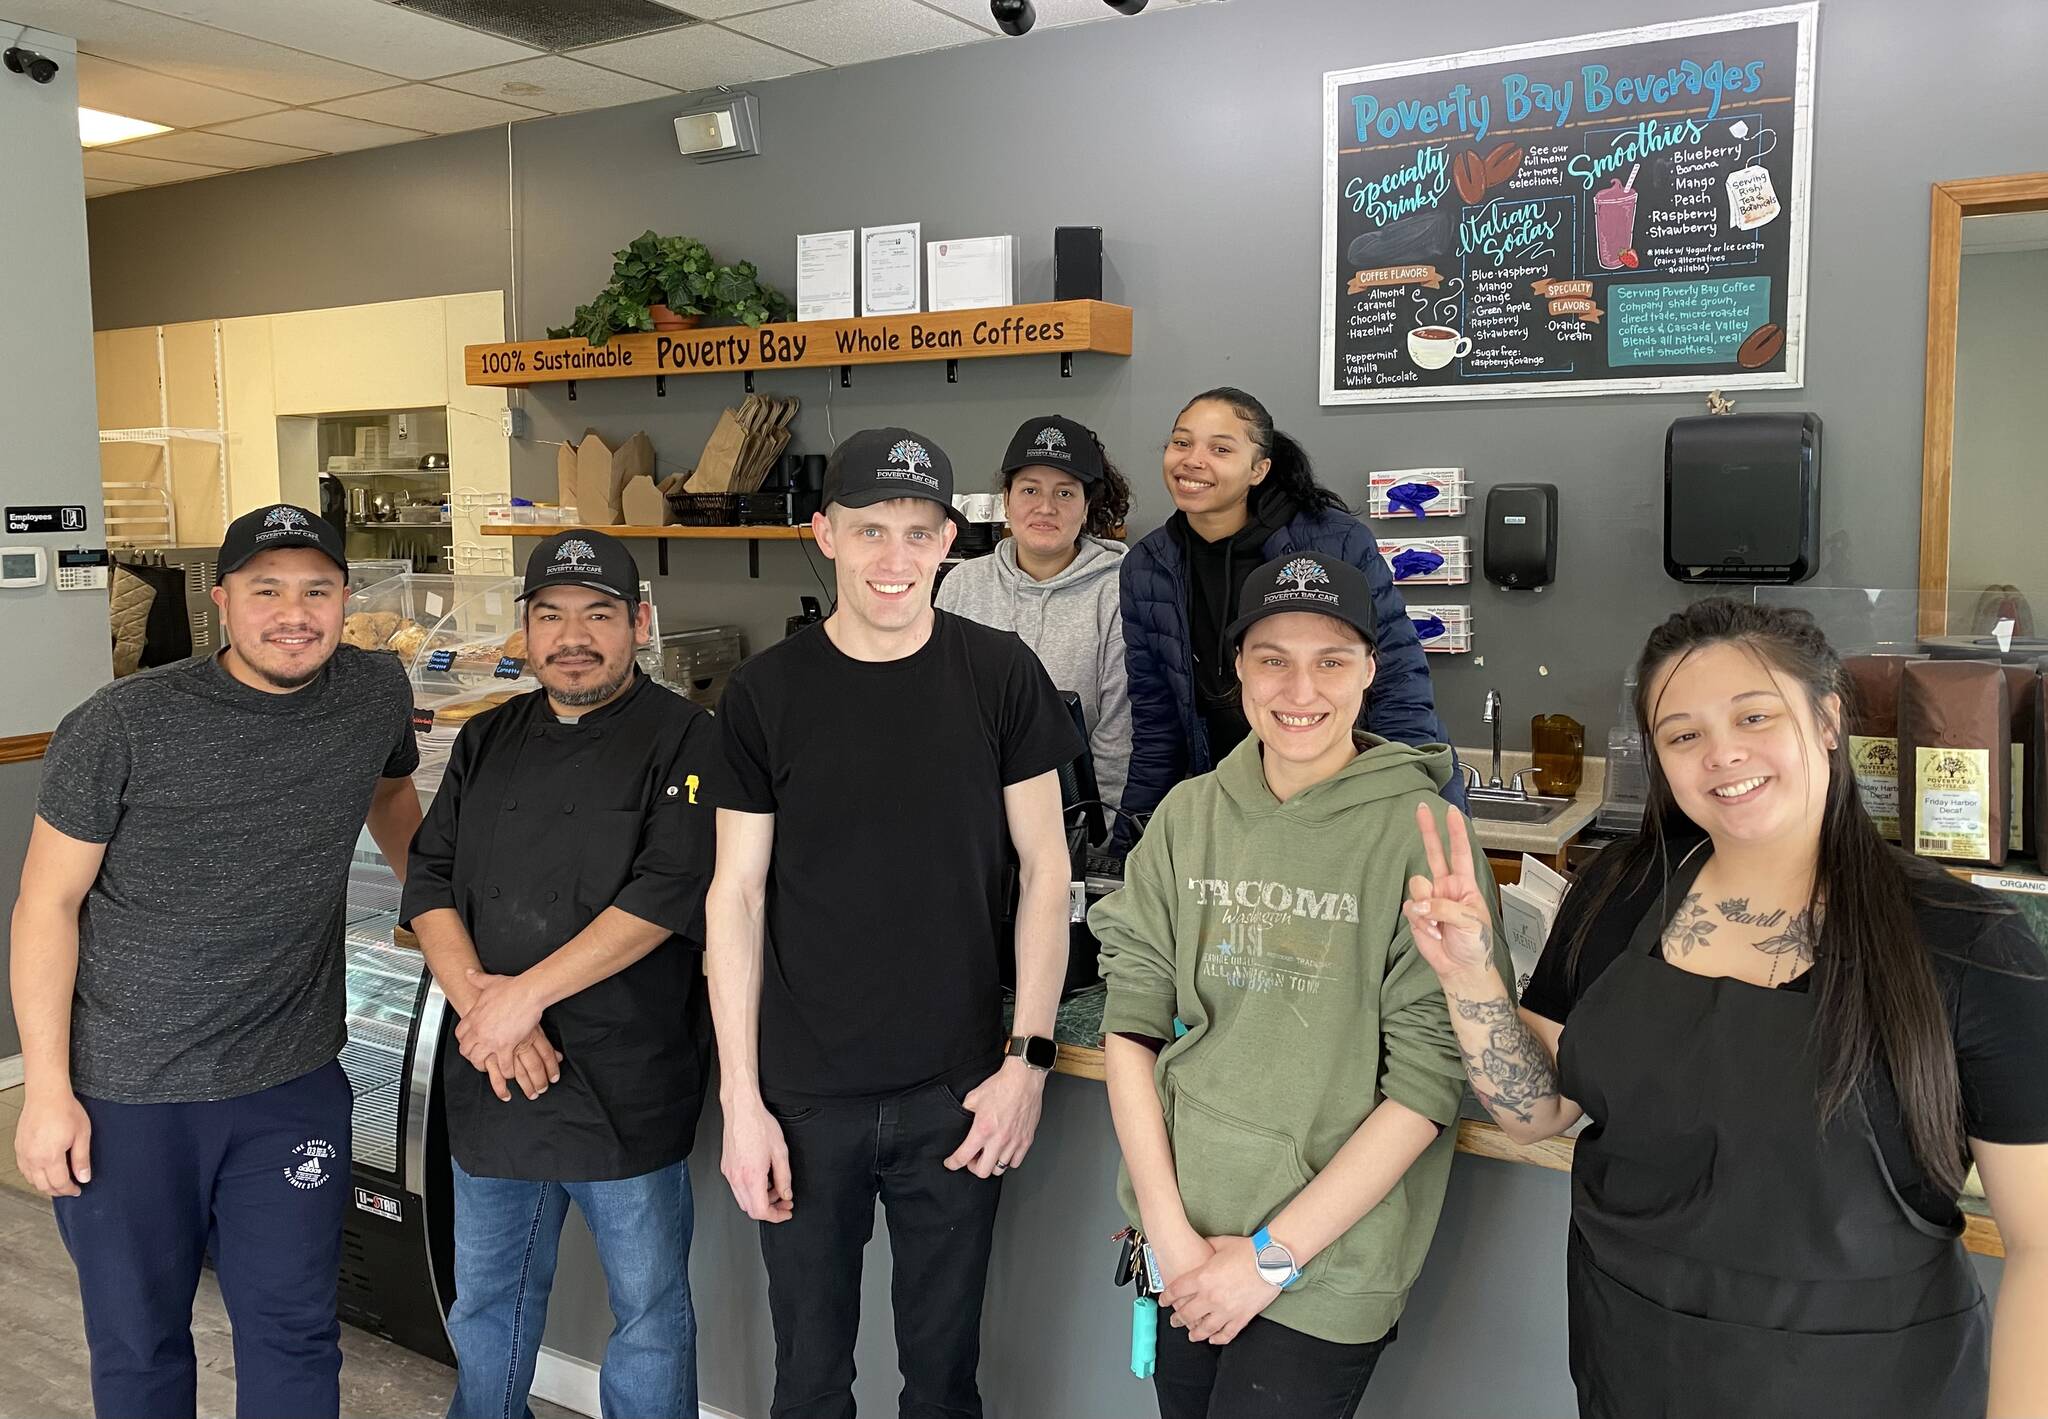 The Poverty Bay Cafe staff takes a moment to pose for a photo during a busy morning at the cafe on April 26. Olivia Sullivan / Federal Way Mirror